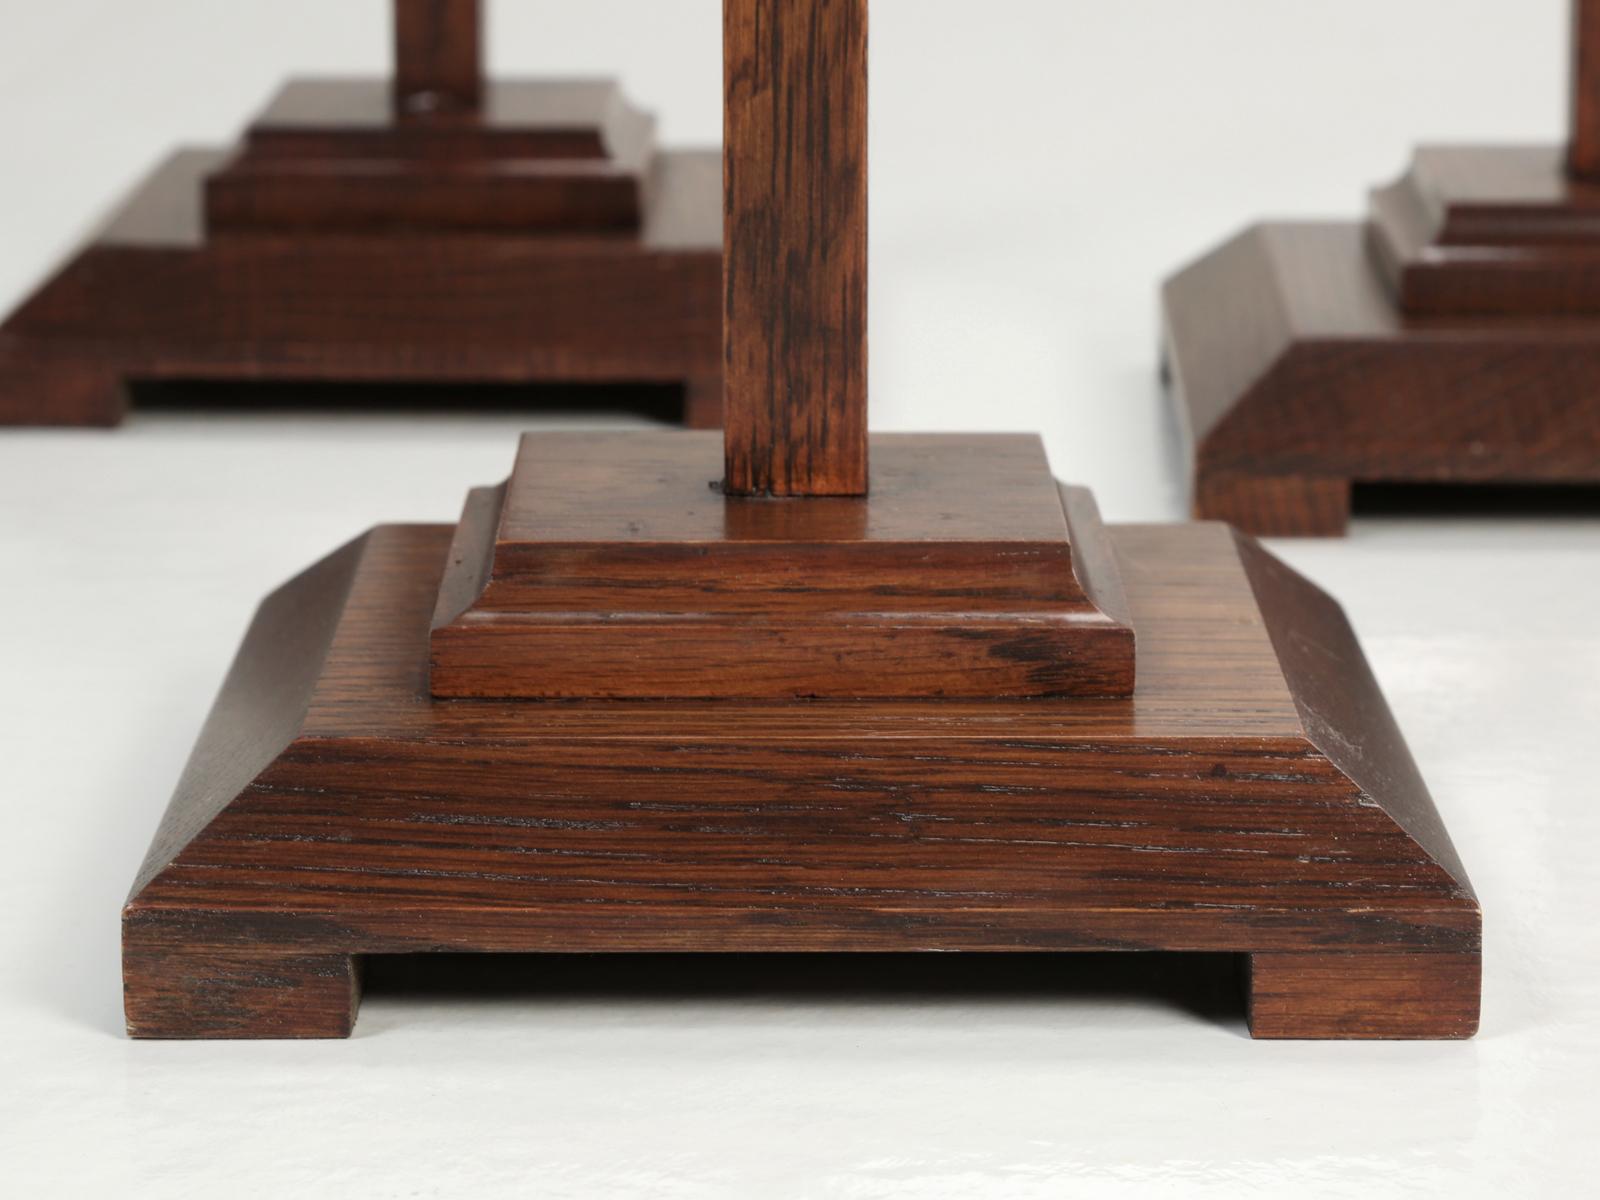 Set of '3' Hat Stands Made of White Oak with Weighted Bottoms for Stability For Sale 10